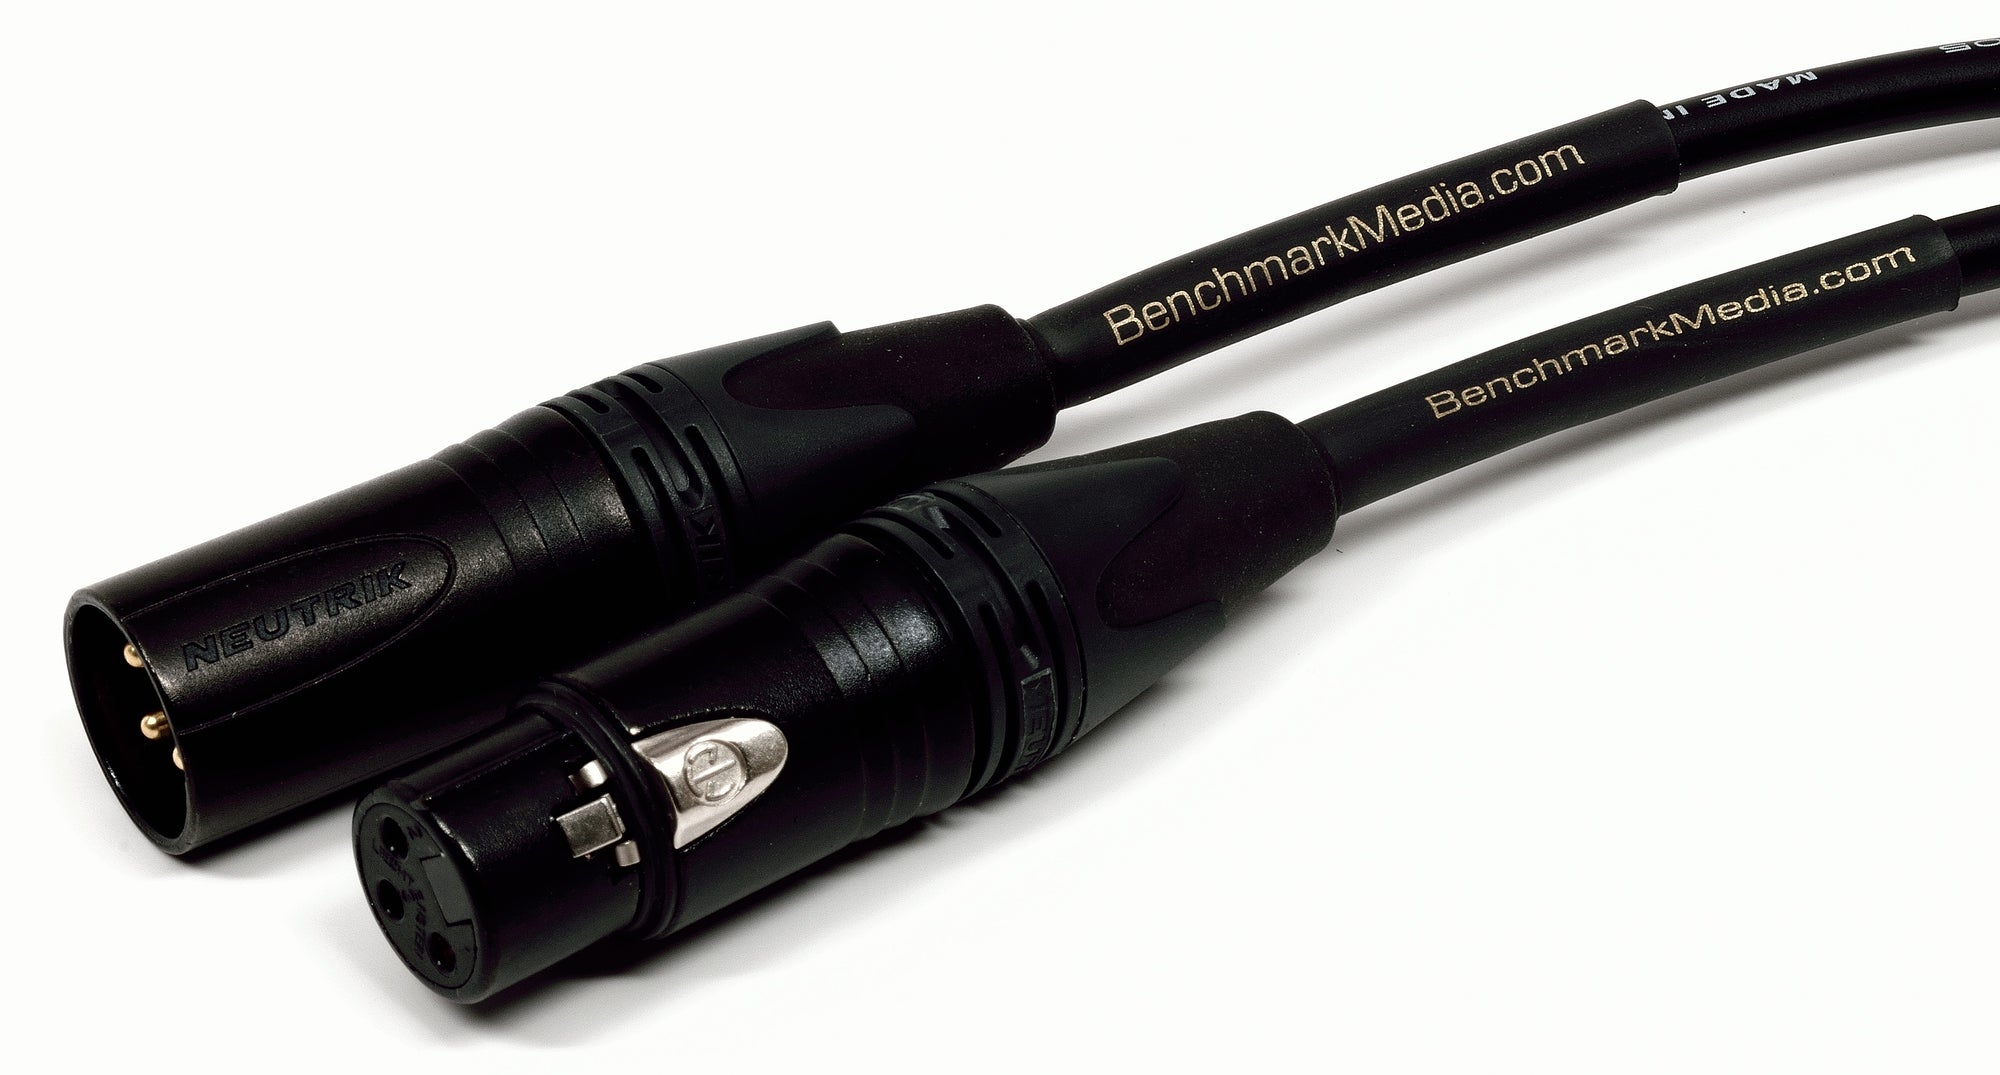 Male and Female XLR cable ends